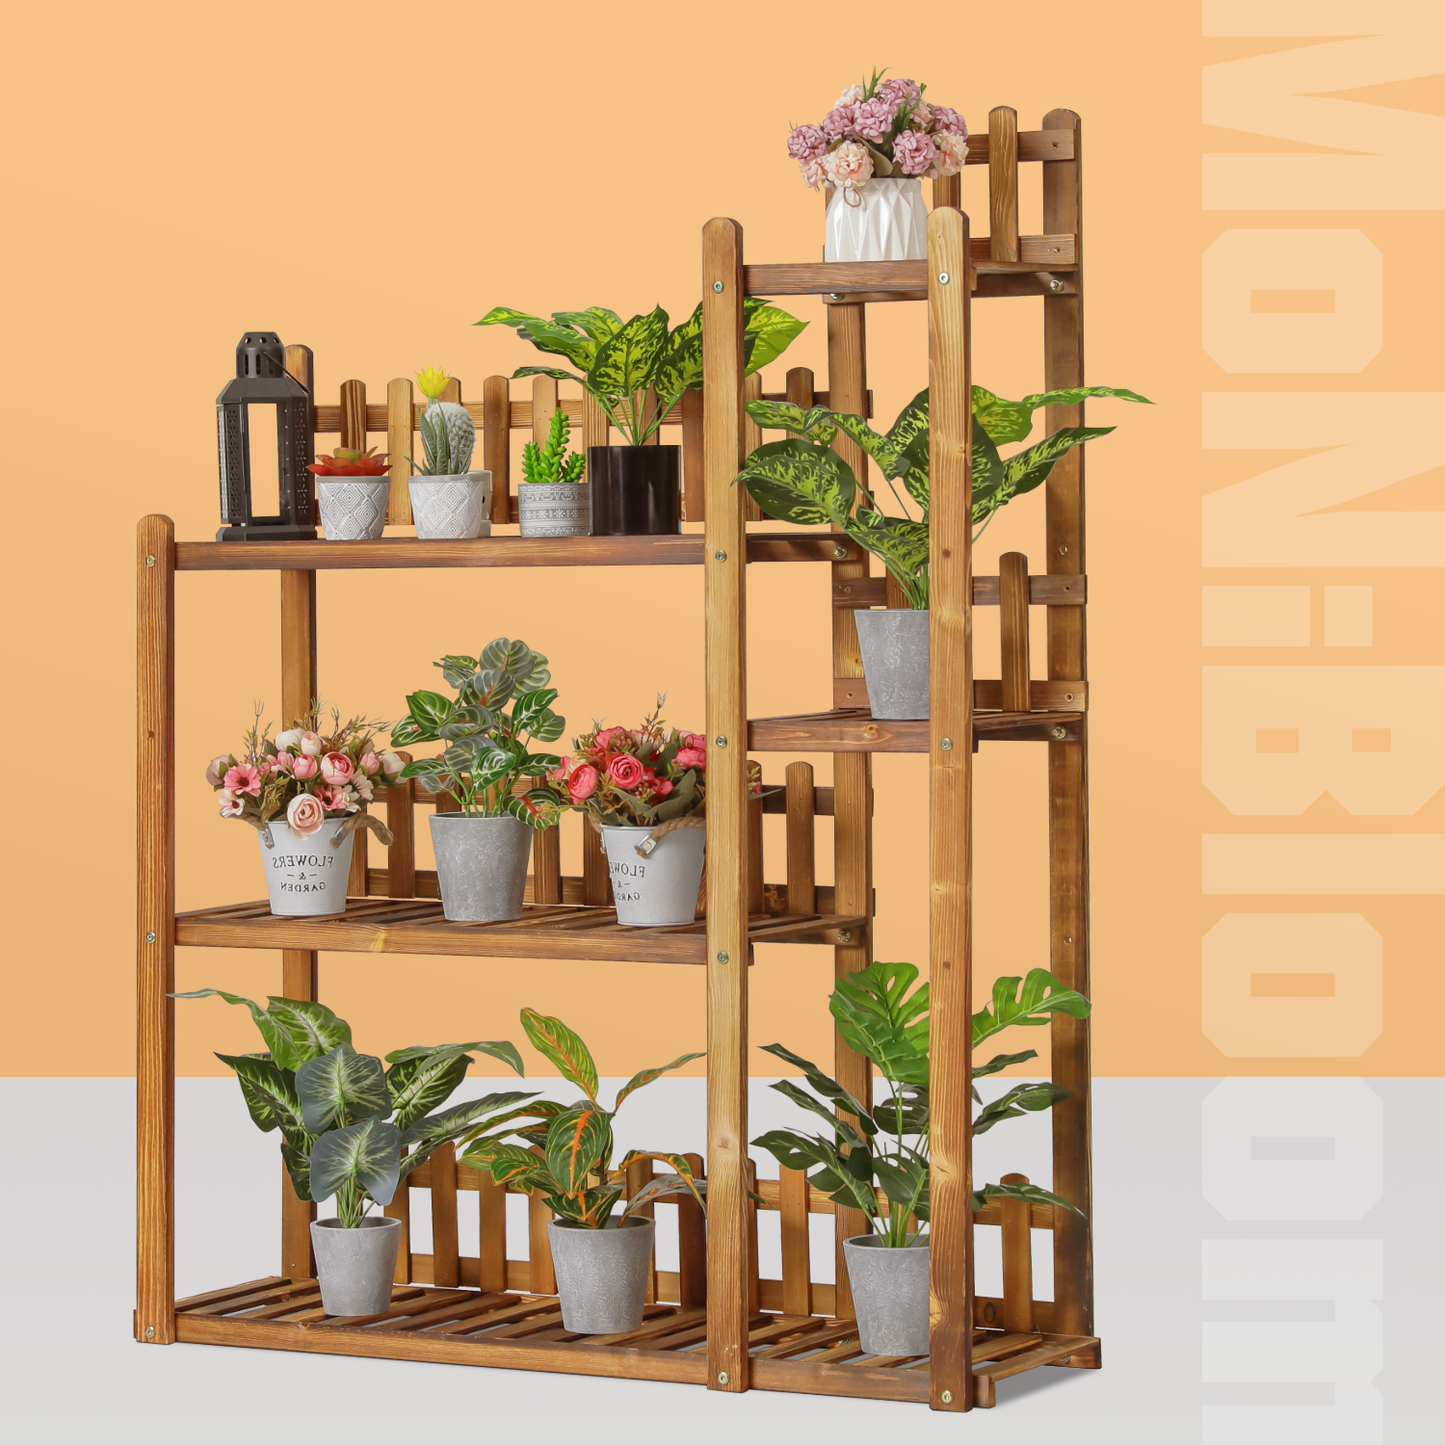 Flower Plant Stand Display Shelf - 9 Potted Plant Holder - with Fence - Carbonized